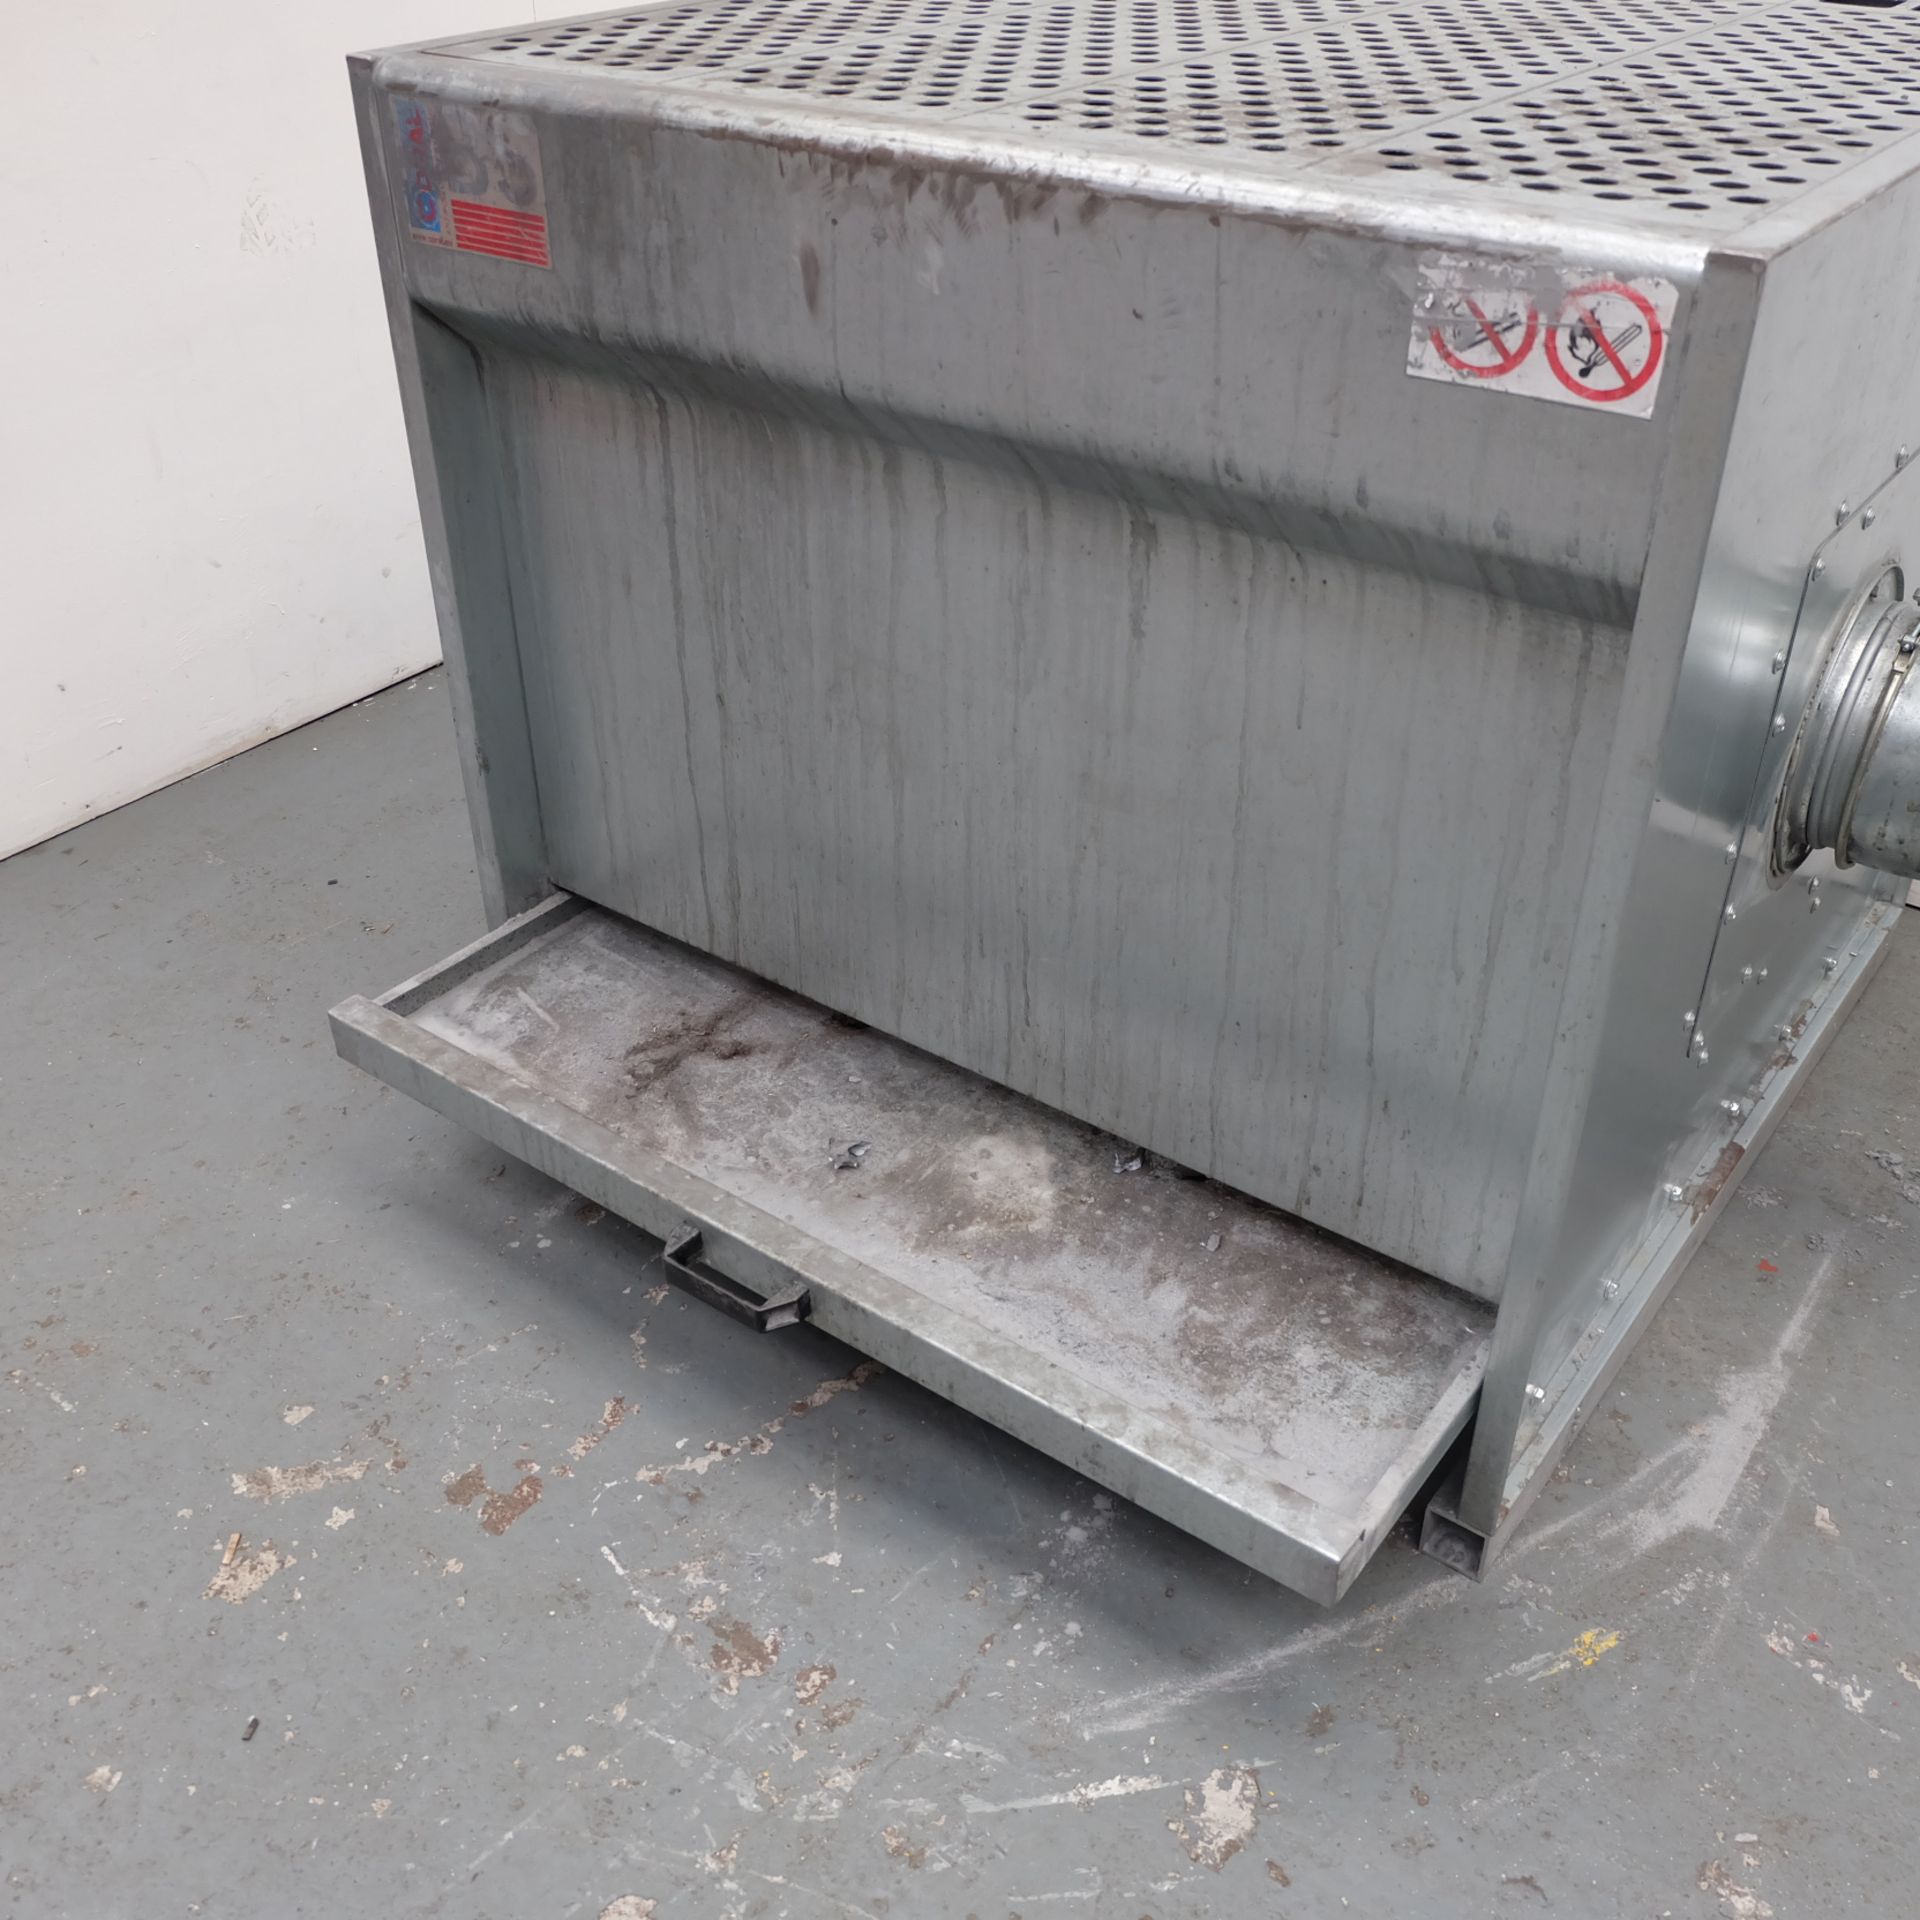 Coral BS/S Welding Bench Without Fan. - Image 4 of 5